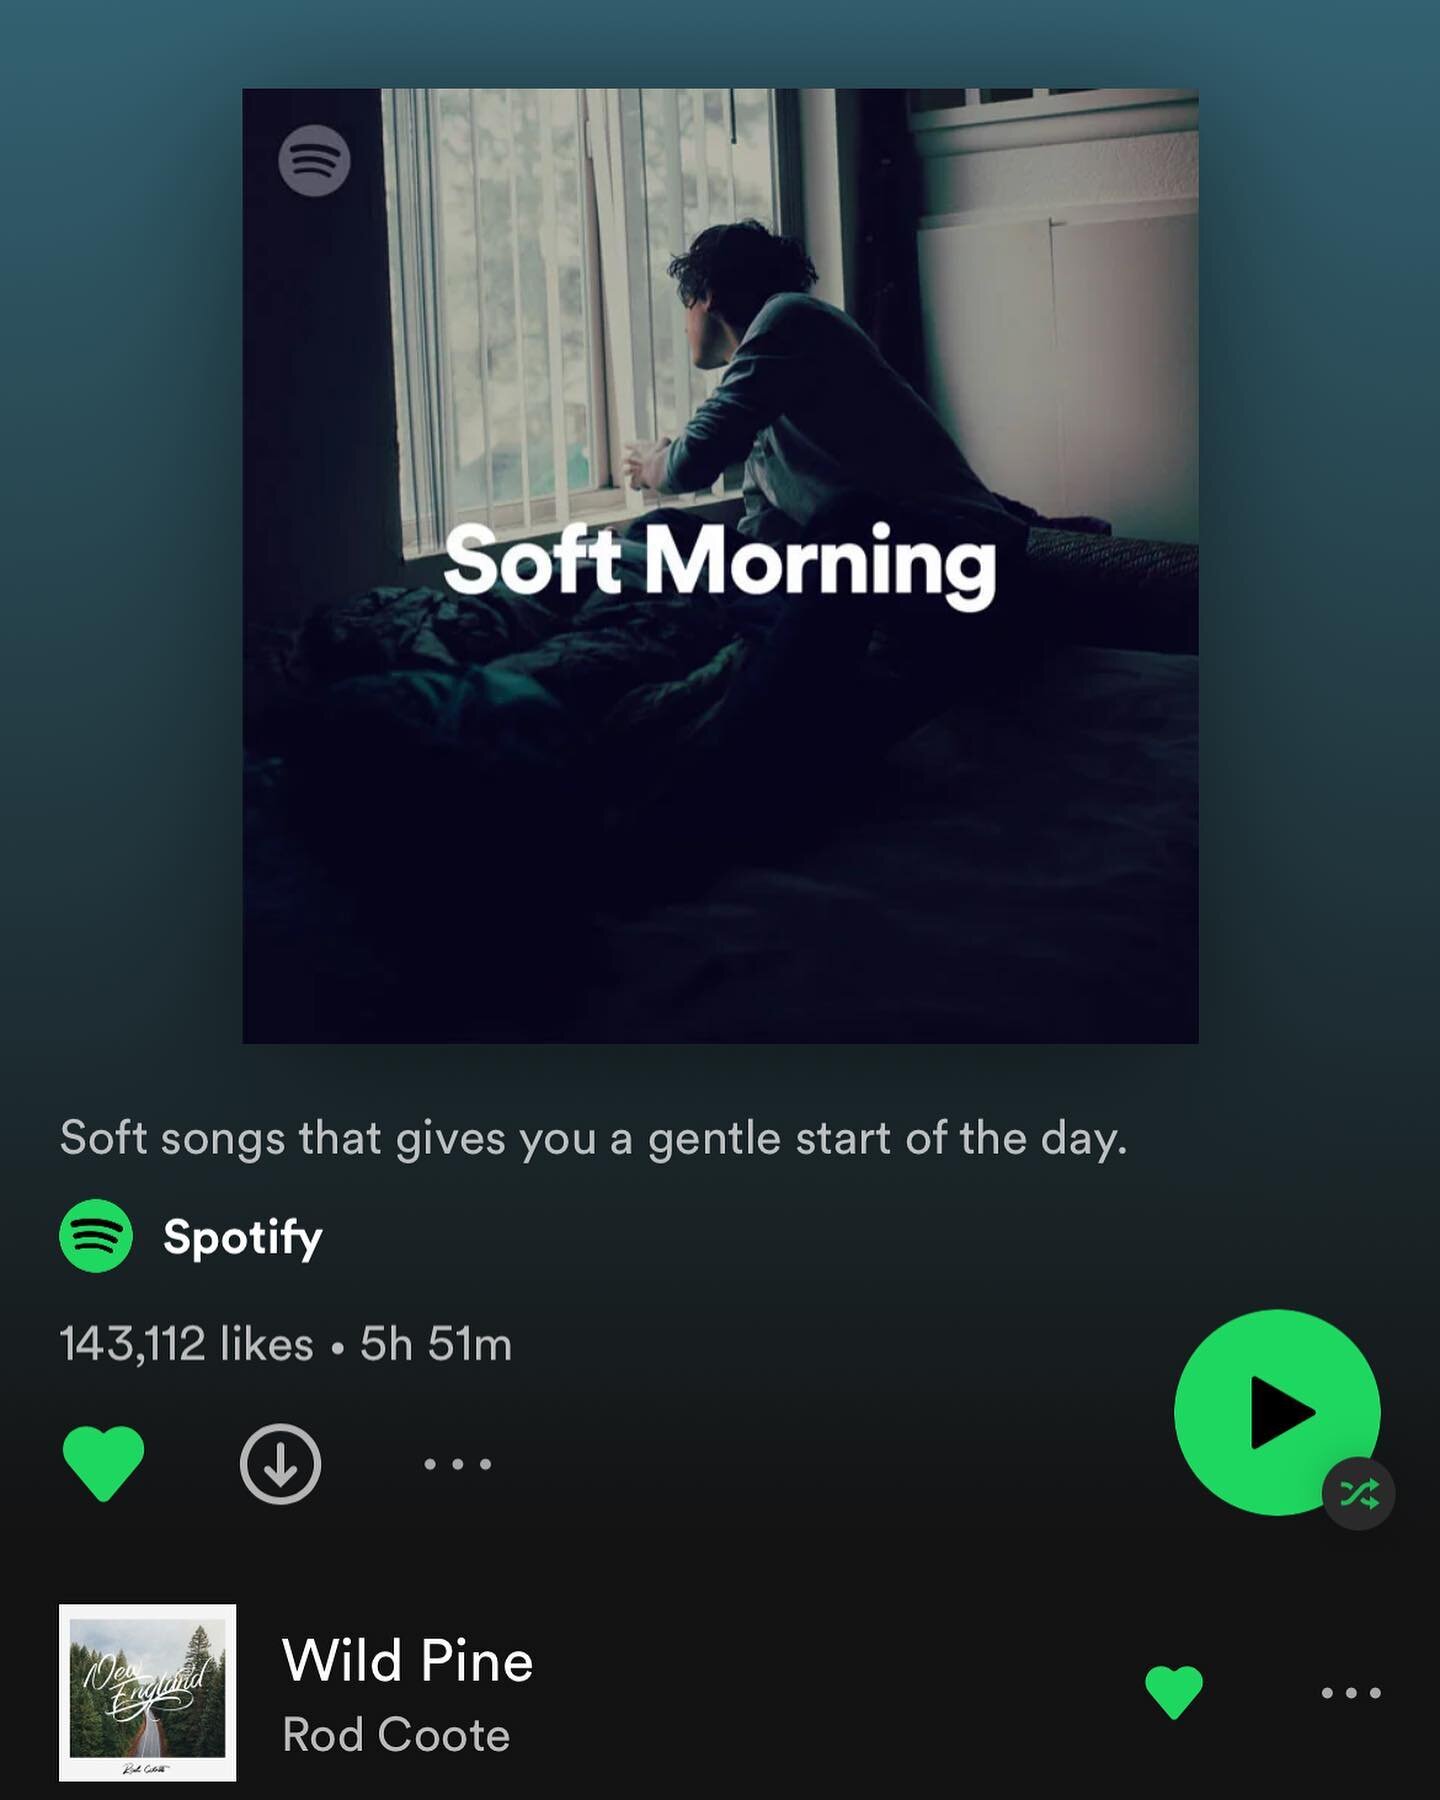 Thanks @spotifyaunz &amp; @spotify for adding my song &lsquo;Wild Pine&rsquo; to this beautiful editorial playlist this morning! ☕️ 🍃 

This song means the world to me &amp; so nice to see it&rsquo;s still connecting.